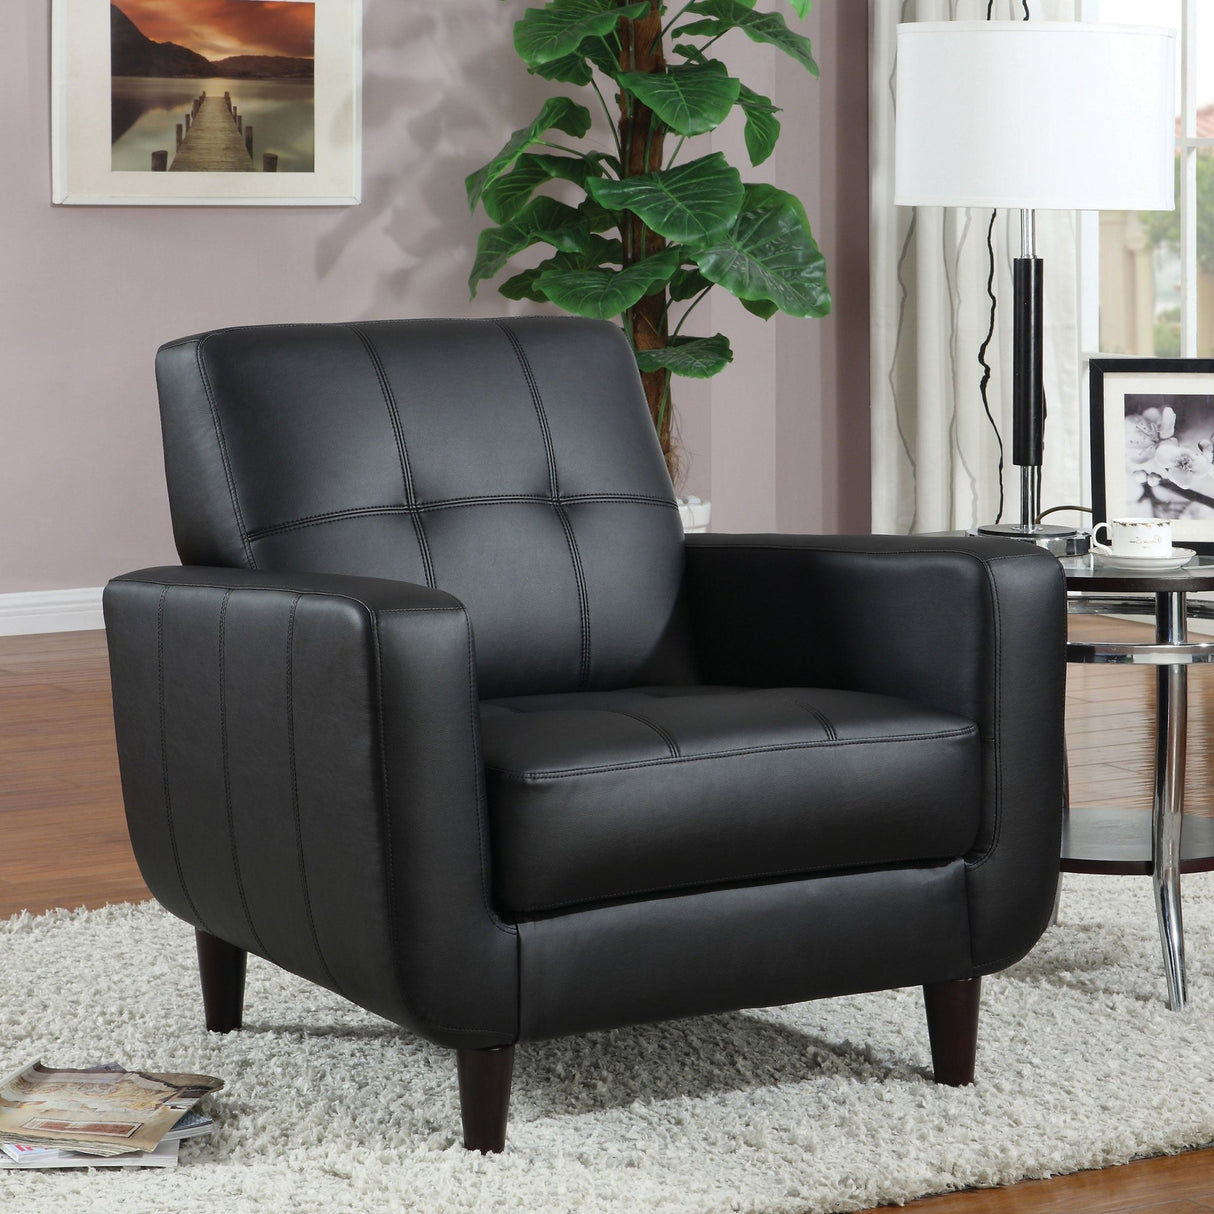 Accent Chair - Aaron Padded Seat Accent Chair Black - Accent Chairs - 900204 - image - 2